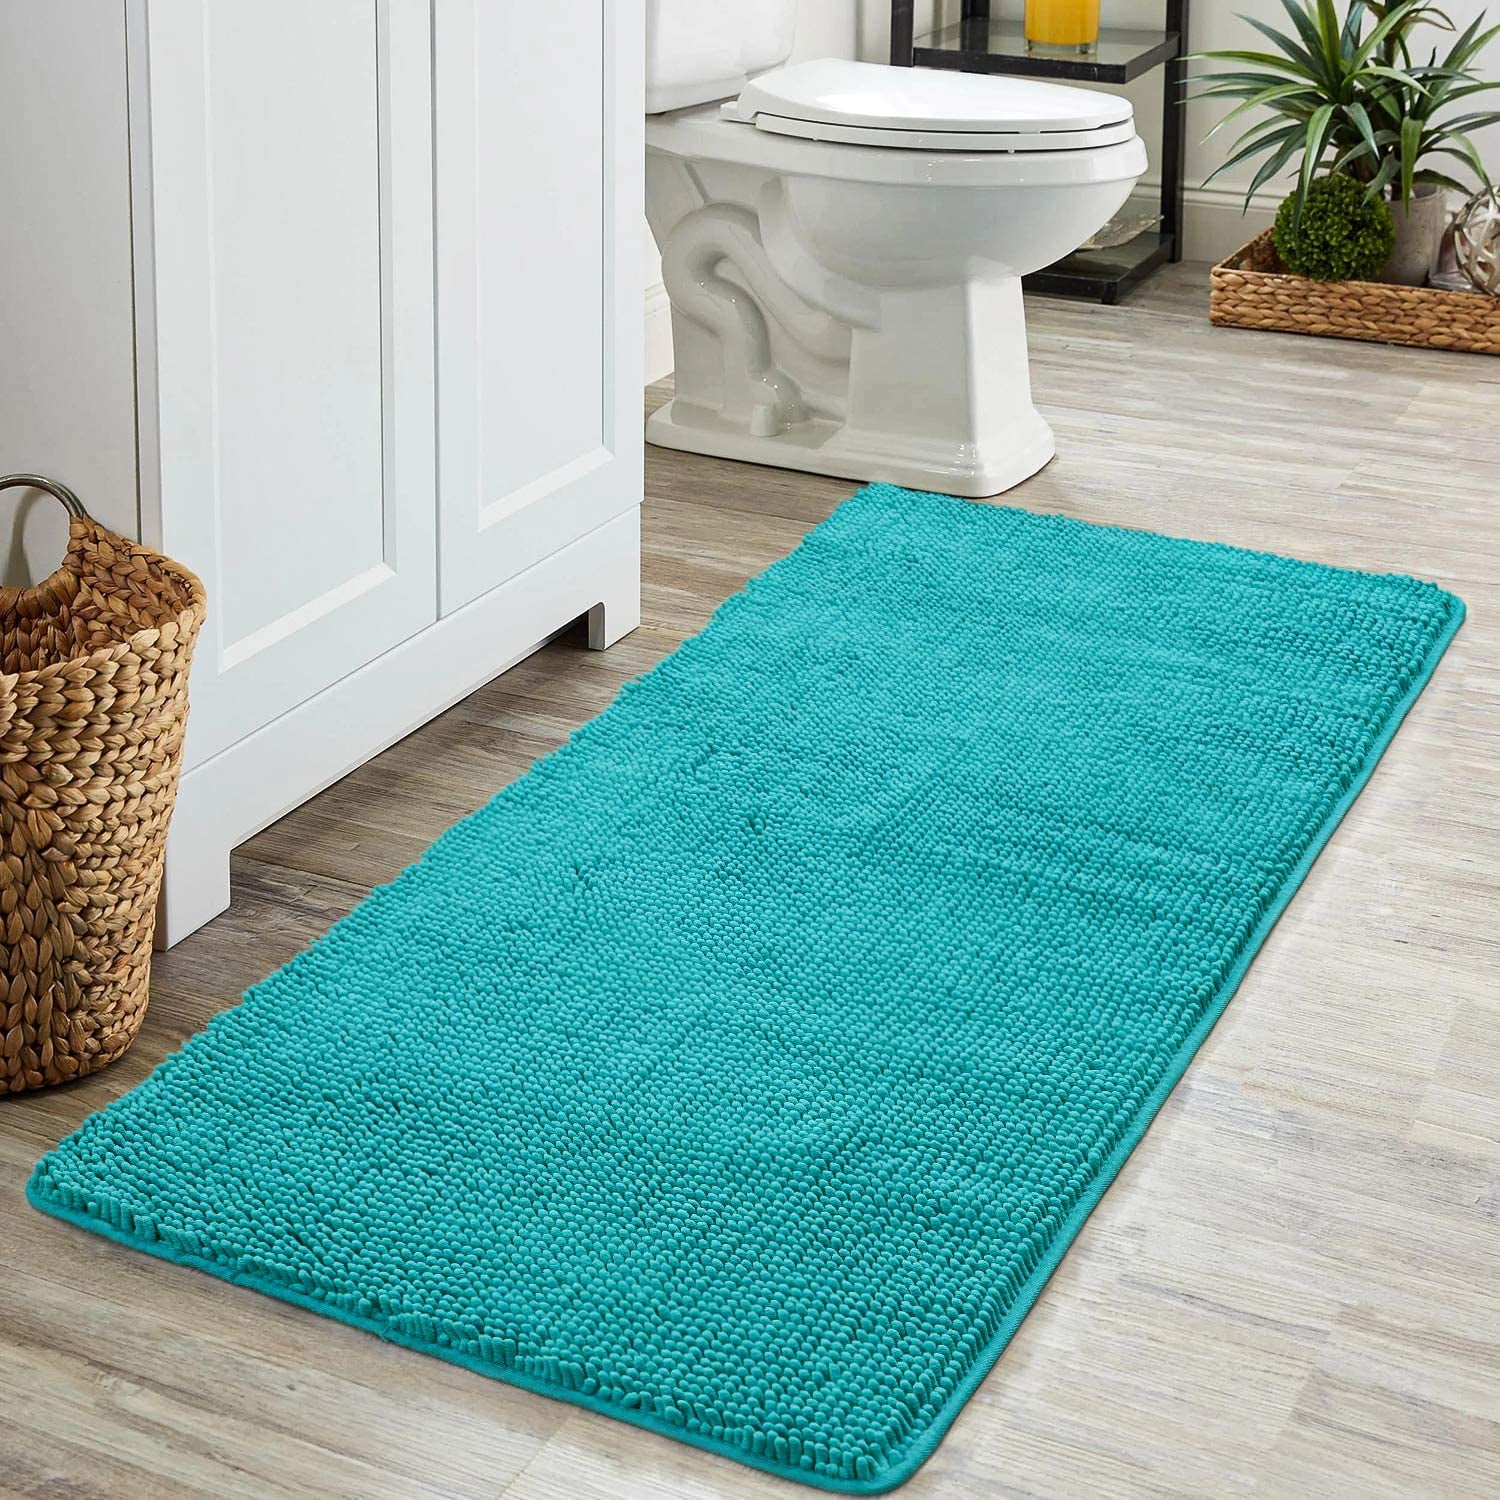 Washable Large Bath Mat Water Absorbent Toilet Pedestal Mats Small Bathroom Rugs 